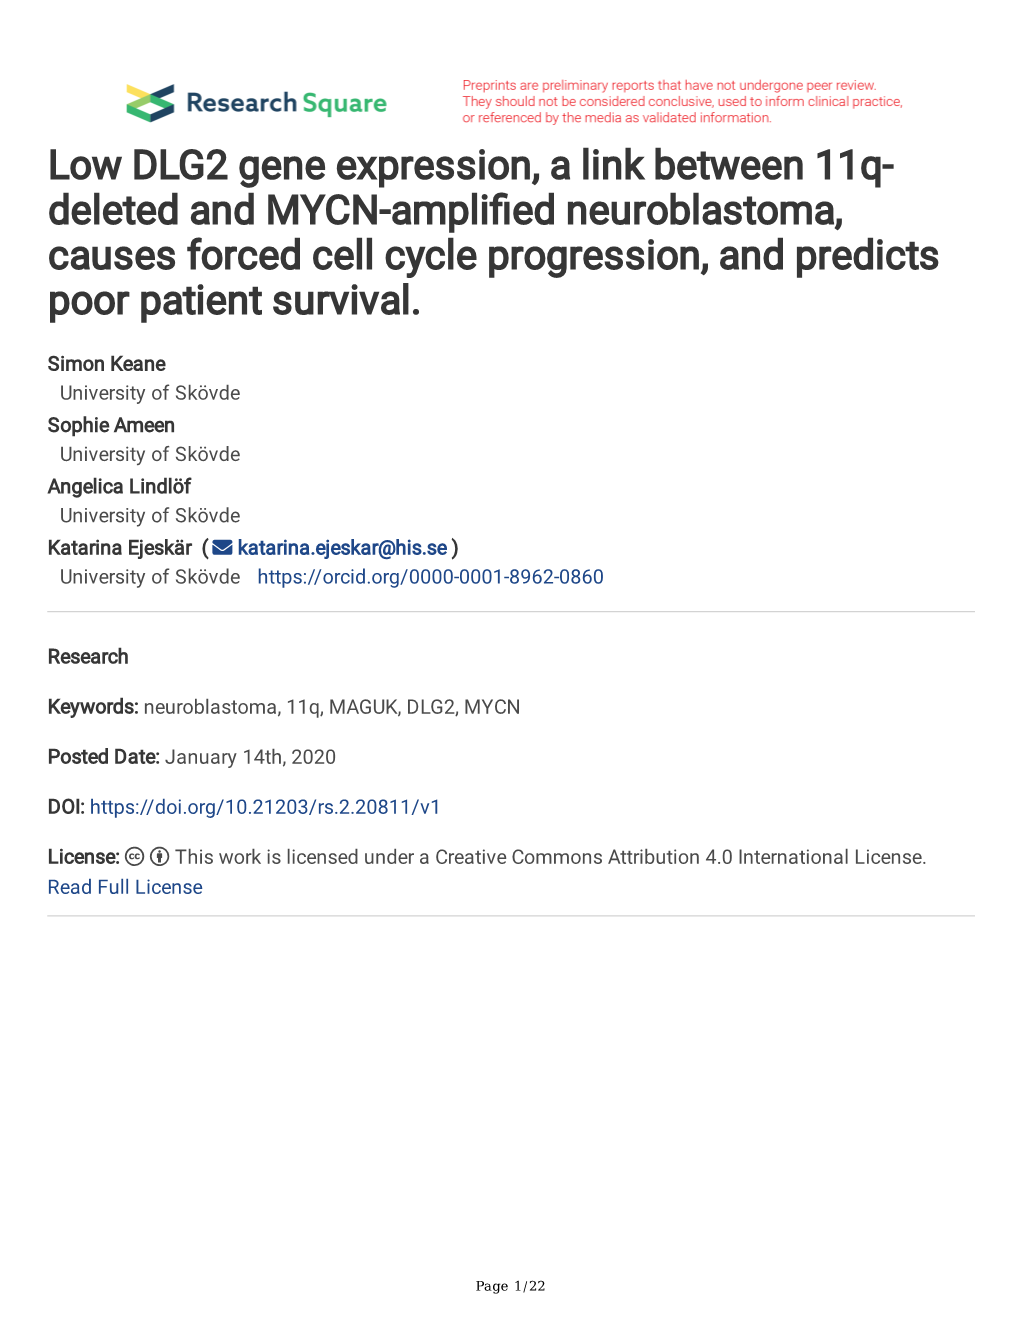 Low DLG2 Gene Expression, a Link Between 11Q- Deleted and MYCN-Amplifed Neuroblastoma, Causes Forced Cell Cycle Progression, and Predicts Poor Patient Survival